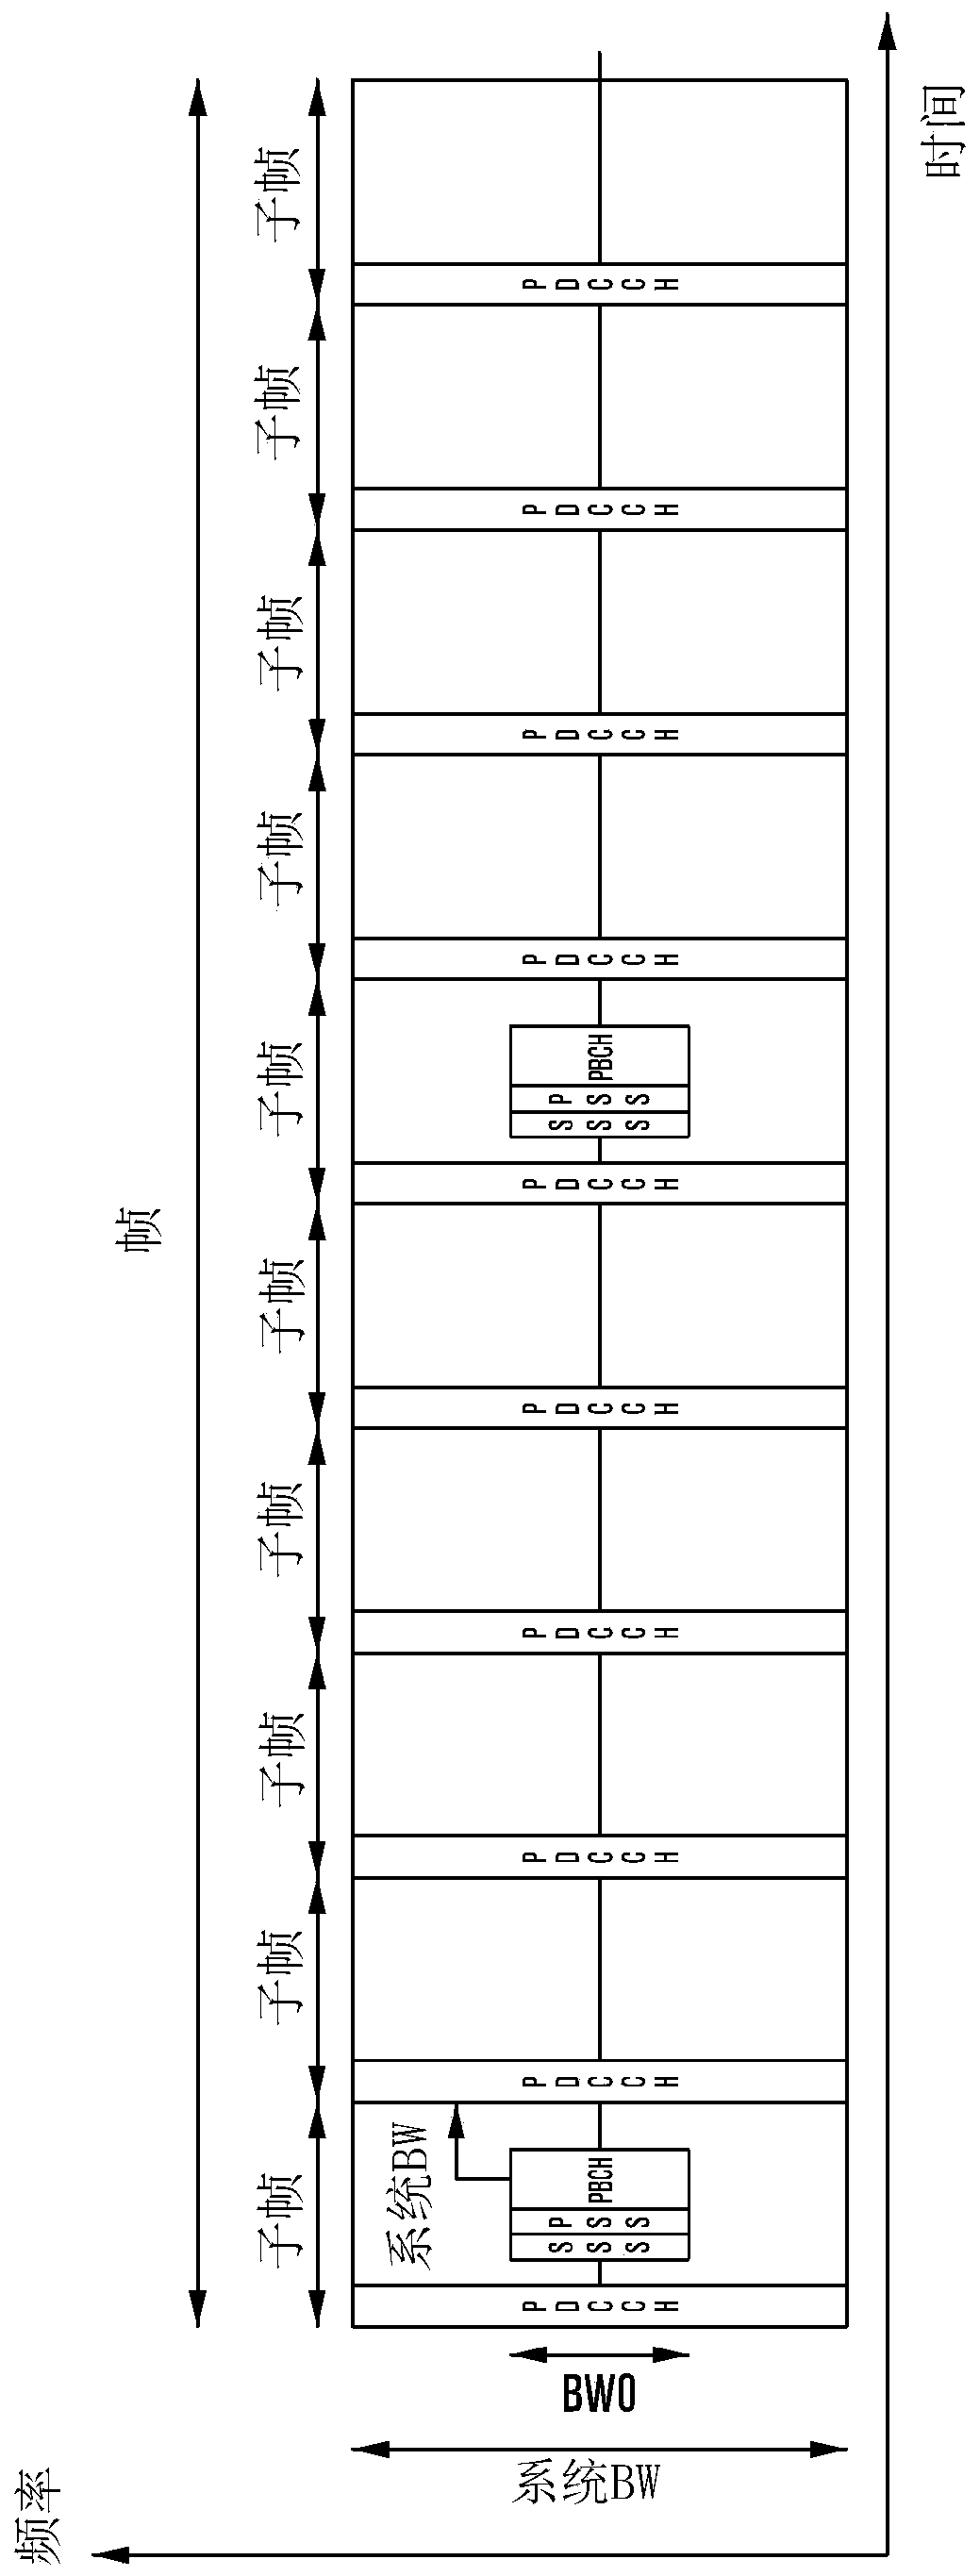 Method and apparatus of flexible data transmissions and receptions in next generation cellular networks